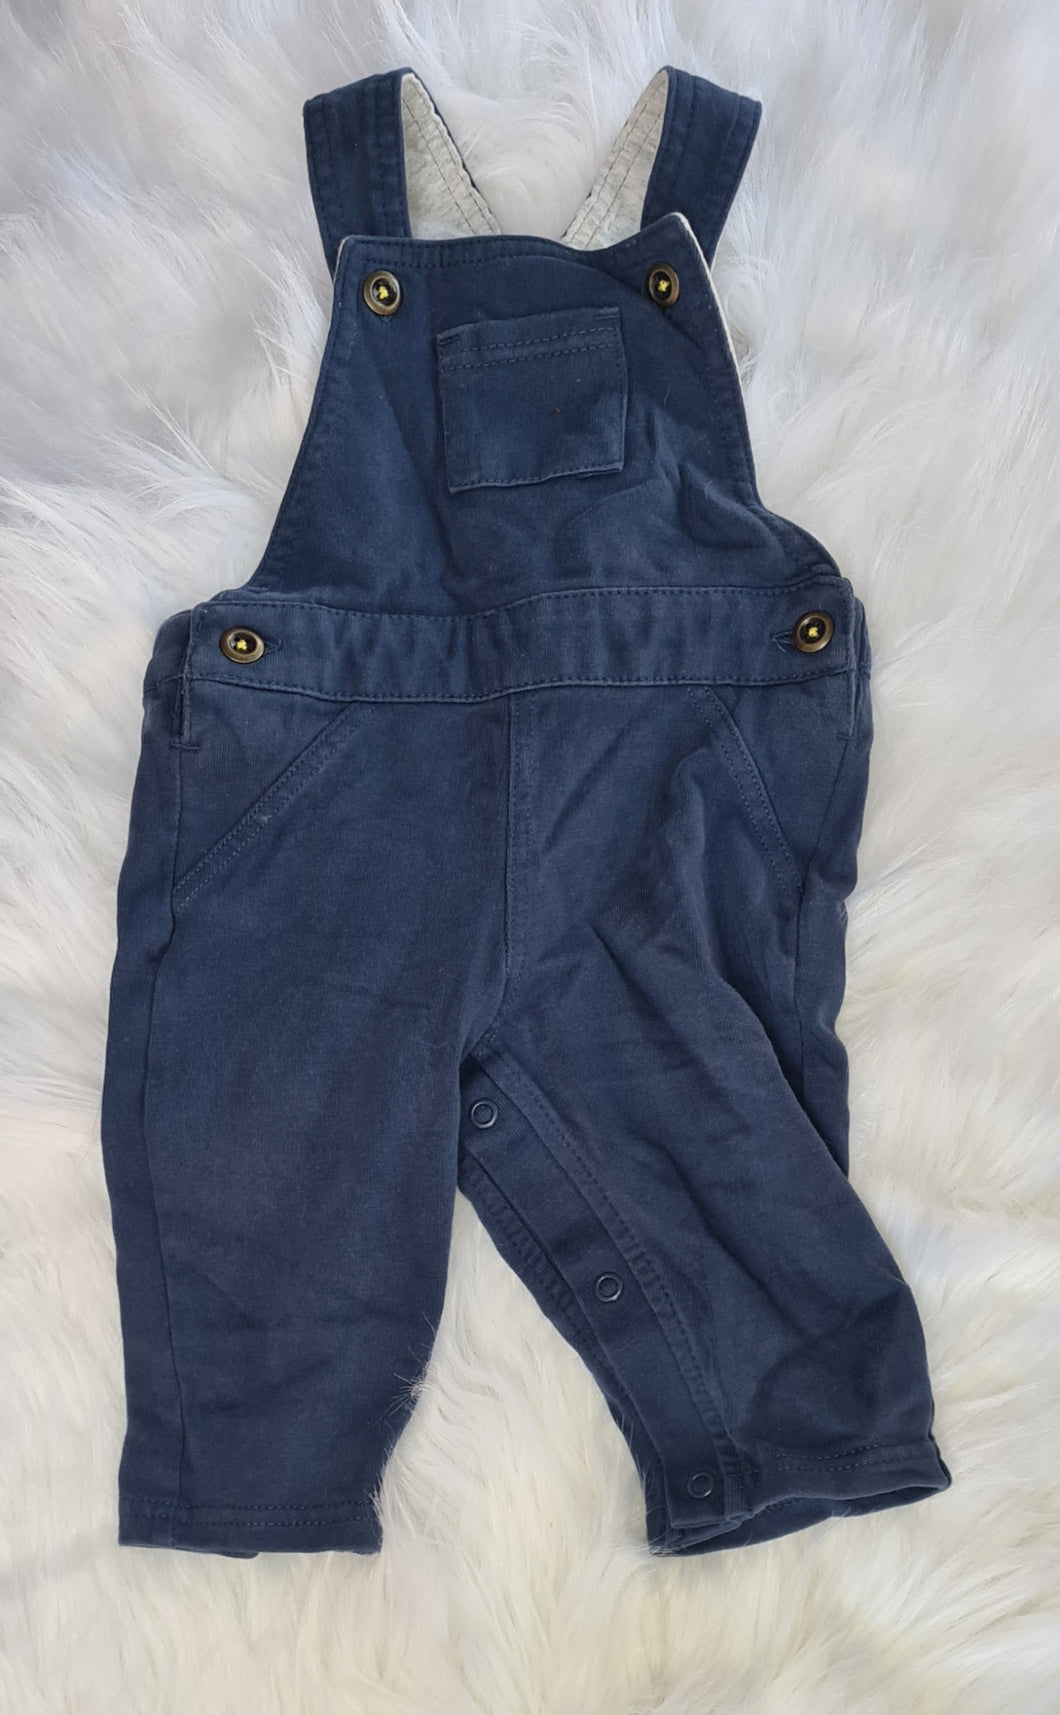 Boys 3-6 Months - Blue Navy Dungarees